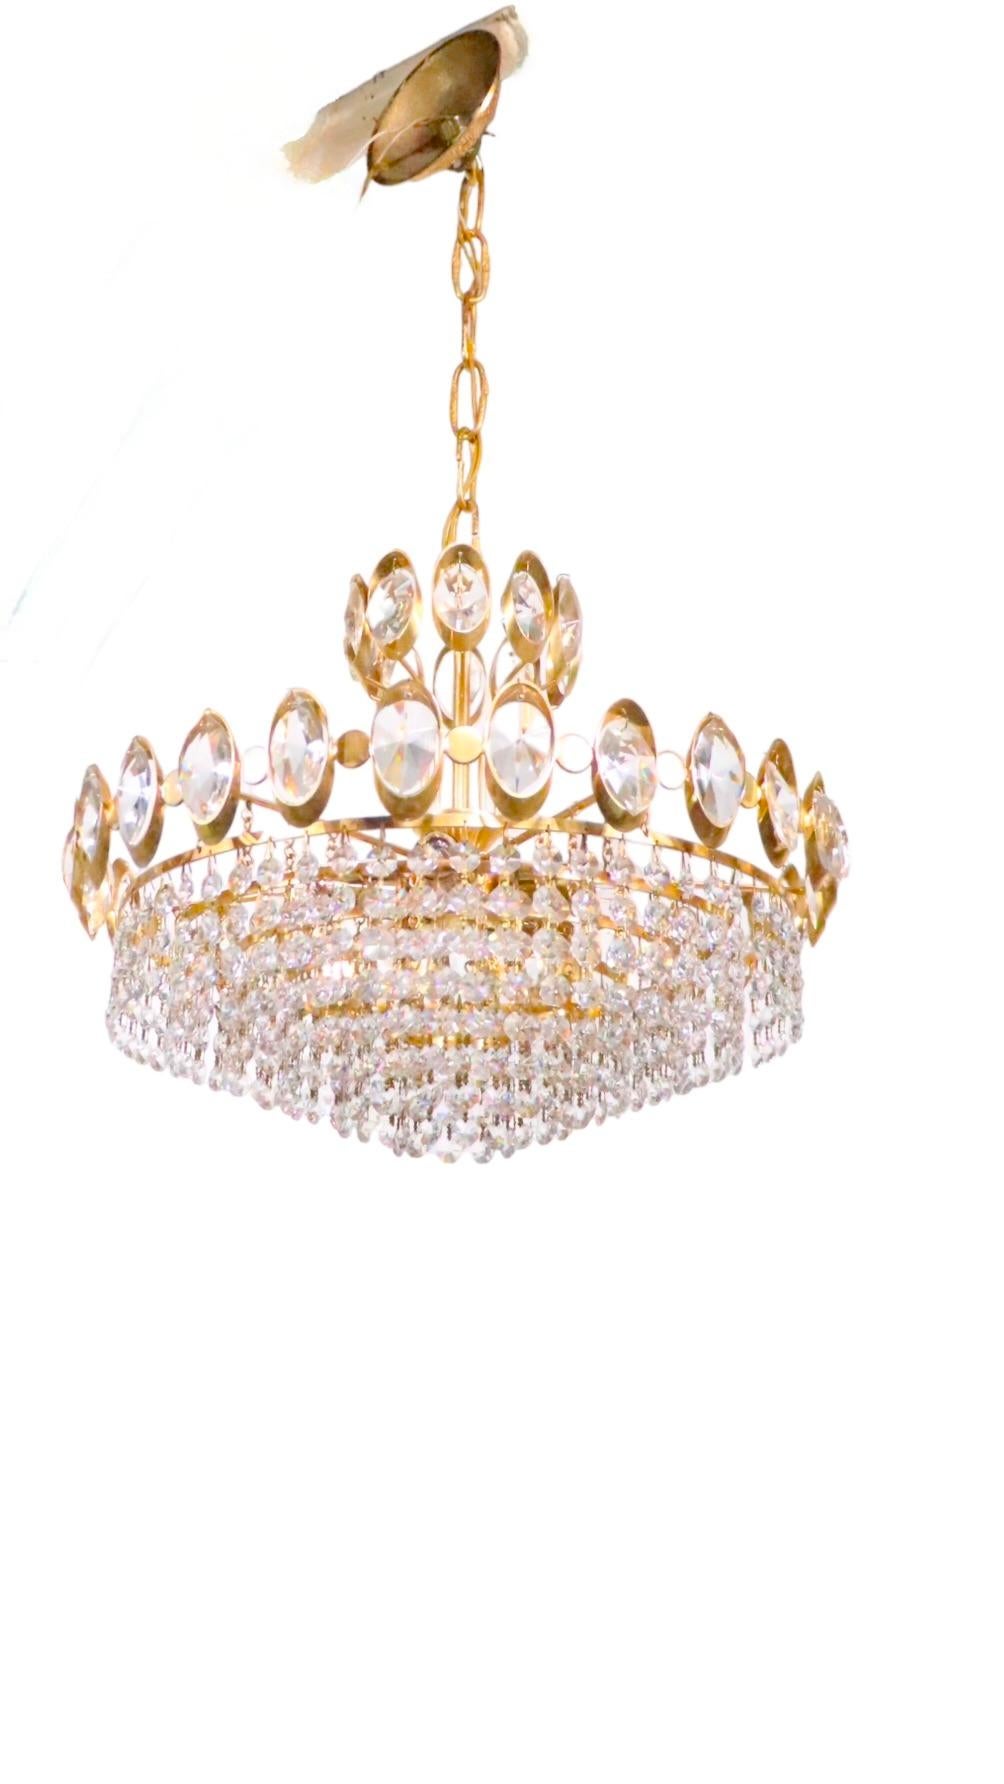 Italian Crystal and Gold Hollywood Regency Style Chandelier by Sciolari For Sale